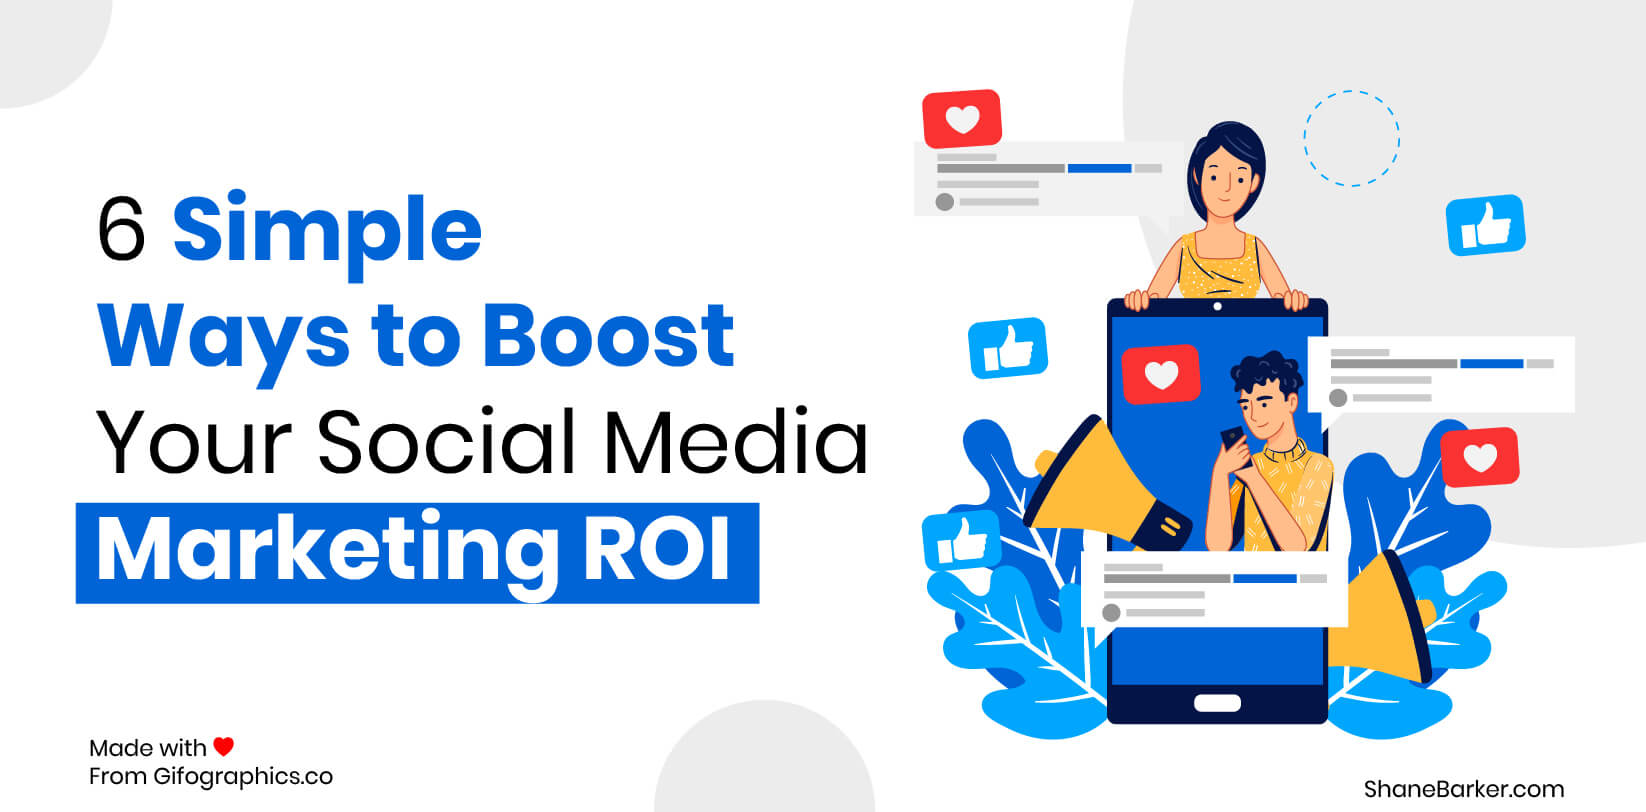 6 Simple Ways to Boost Your Social Media Marketing ROI